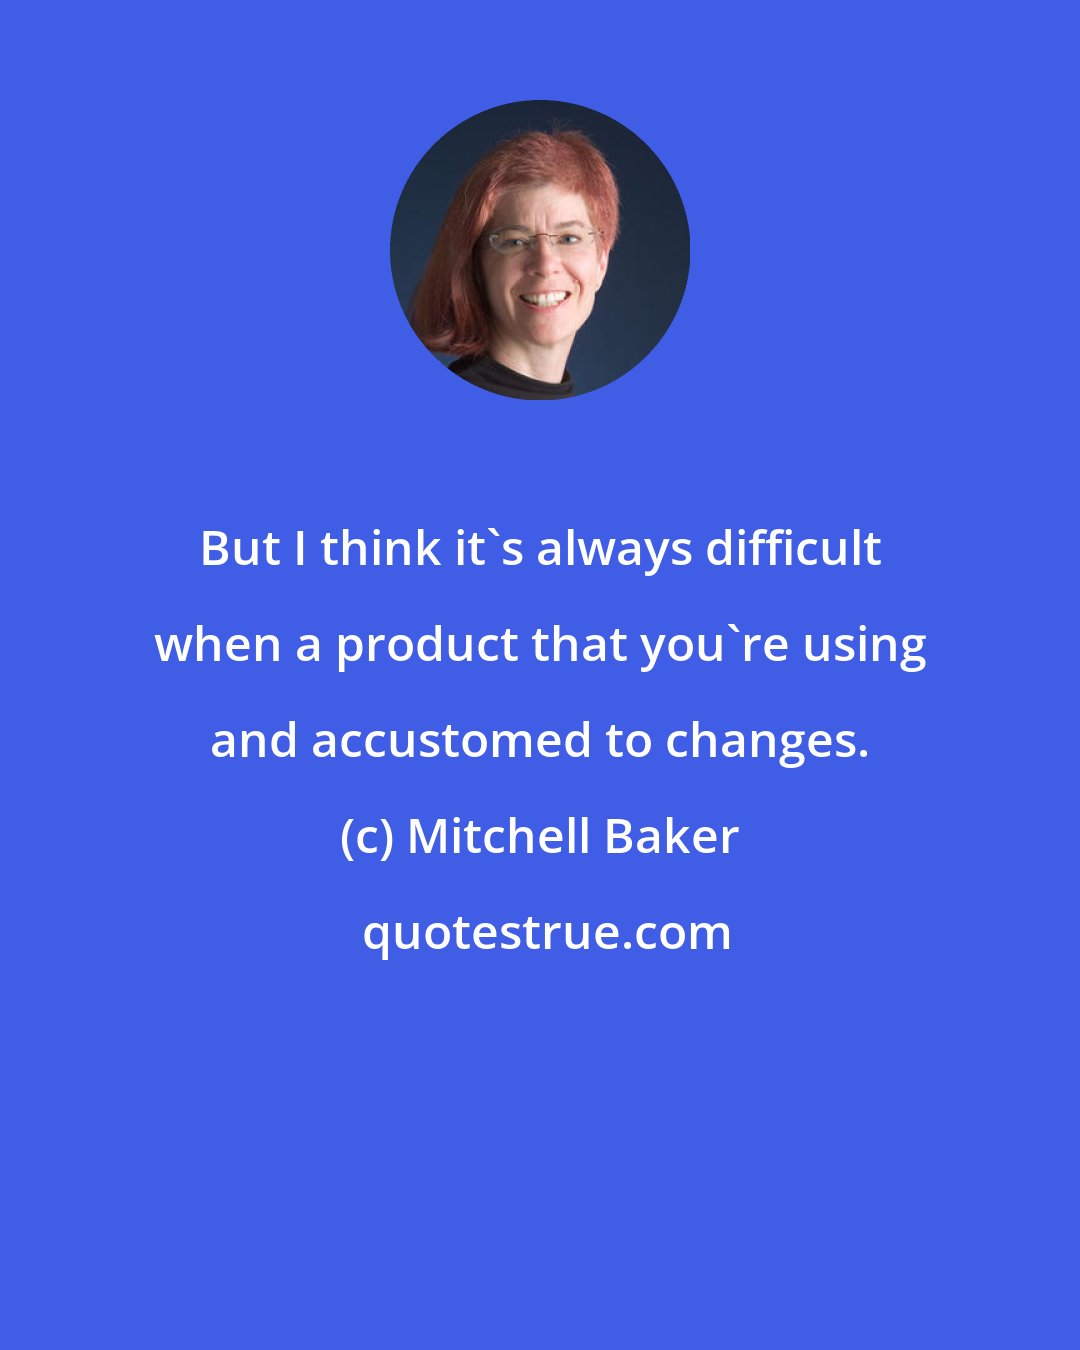 Mitchell Baker: But I think it's always difficult when a product that you're using and accustomed to changes.